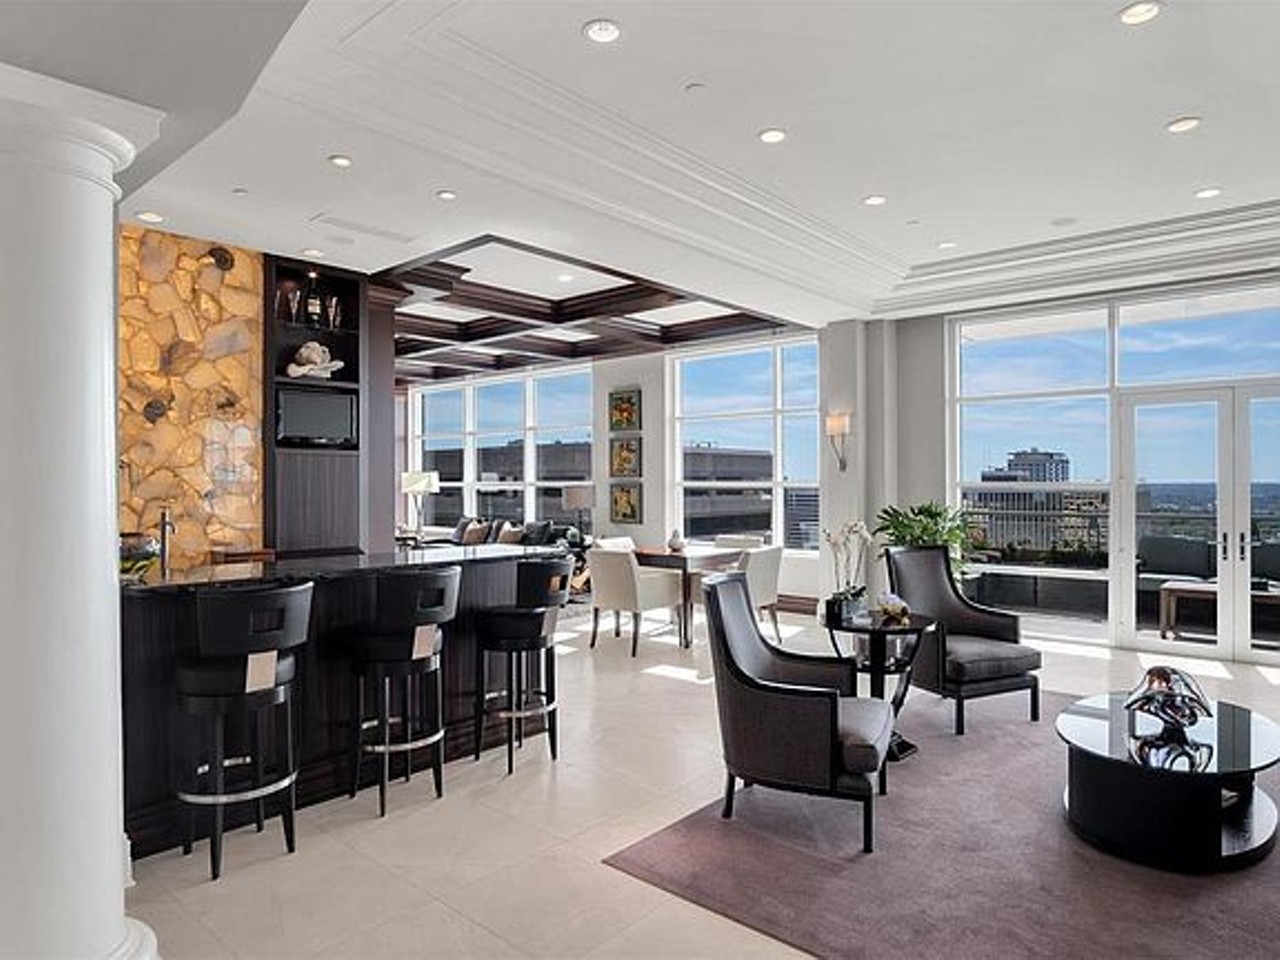 The Most Expensive Apartment on the Market in St. Louis Has Killer Views [PHOTOS]